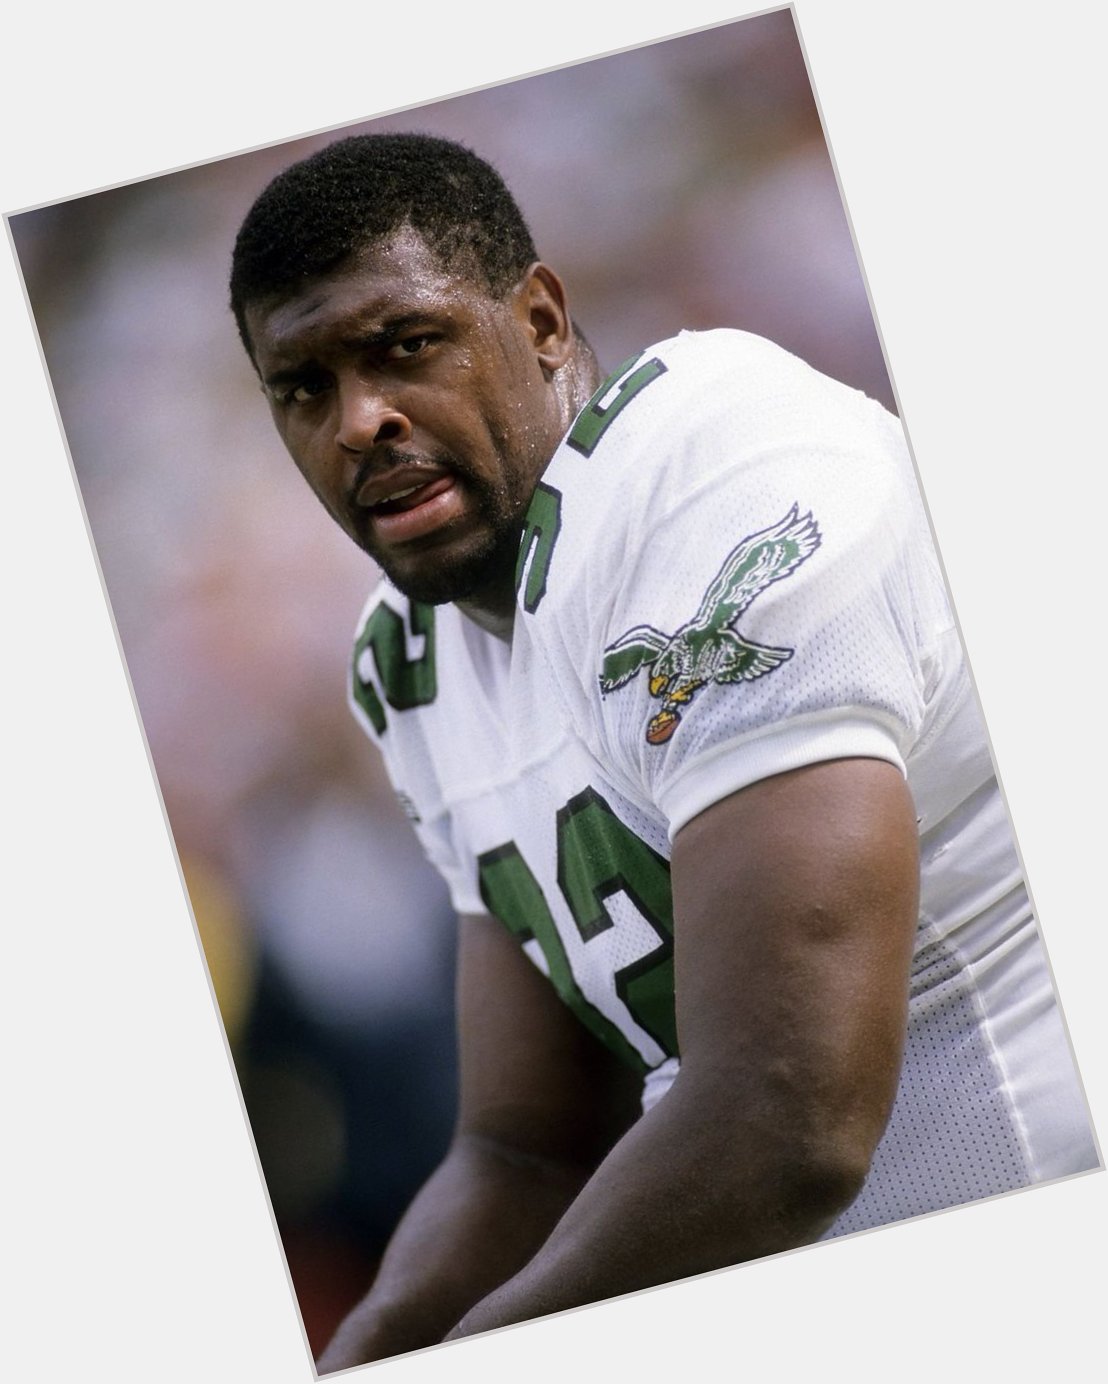 Today, legend Reggie White would have been 61 years old.
Happy birthday to \"The Minister Of Defense\" 